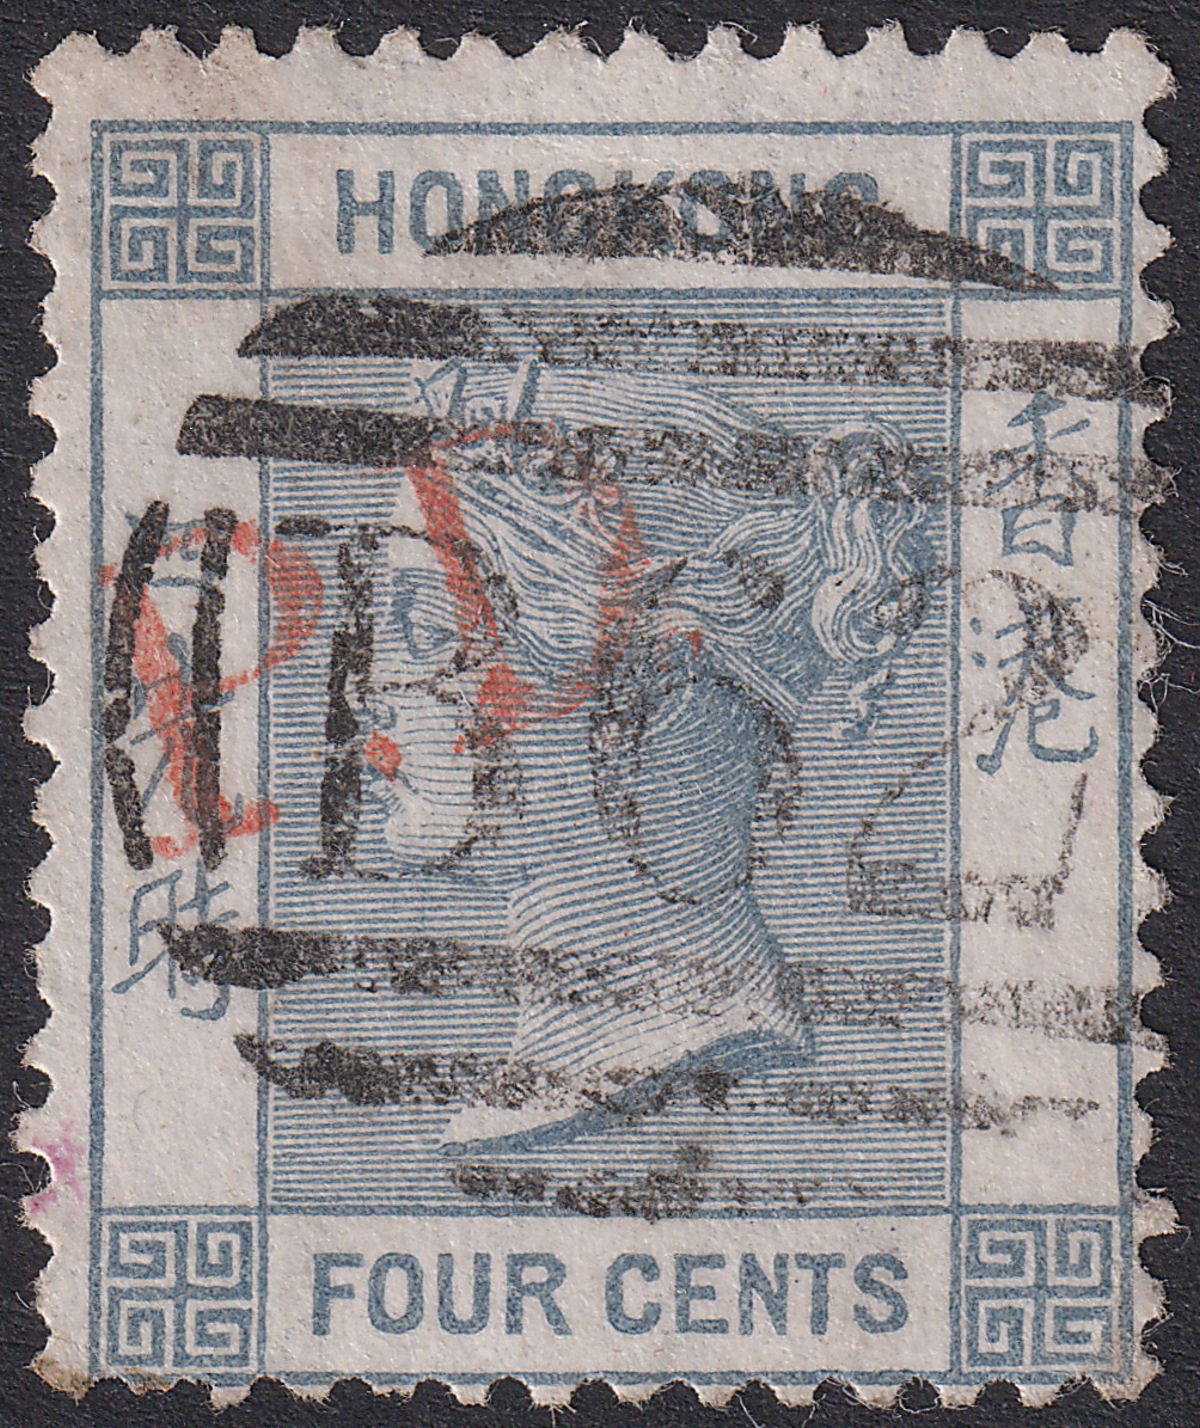 Hong Kong 1863 QV 4c Grey Used with Red PD Mark and B62 Postmark